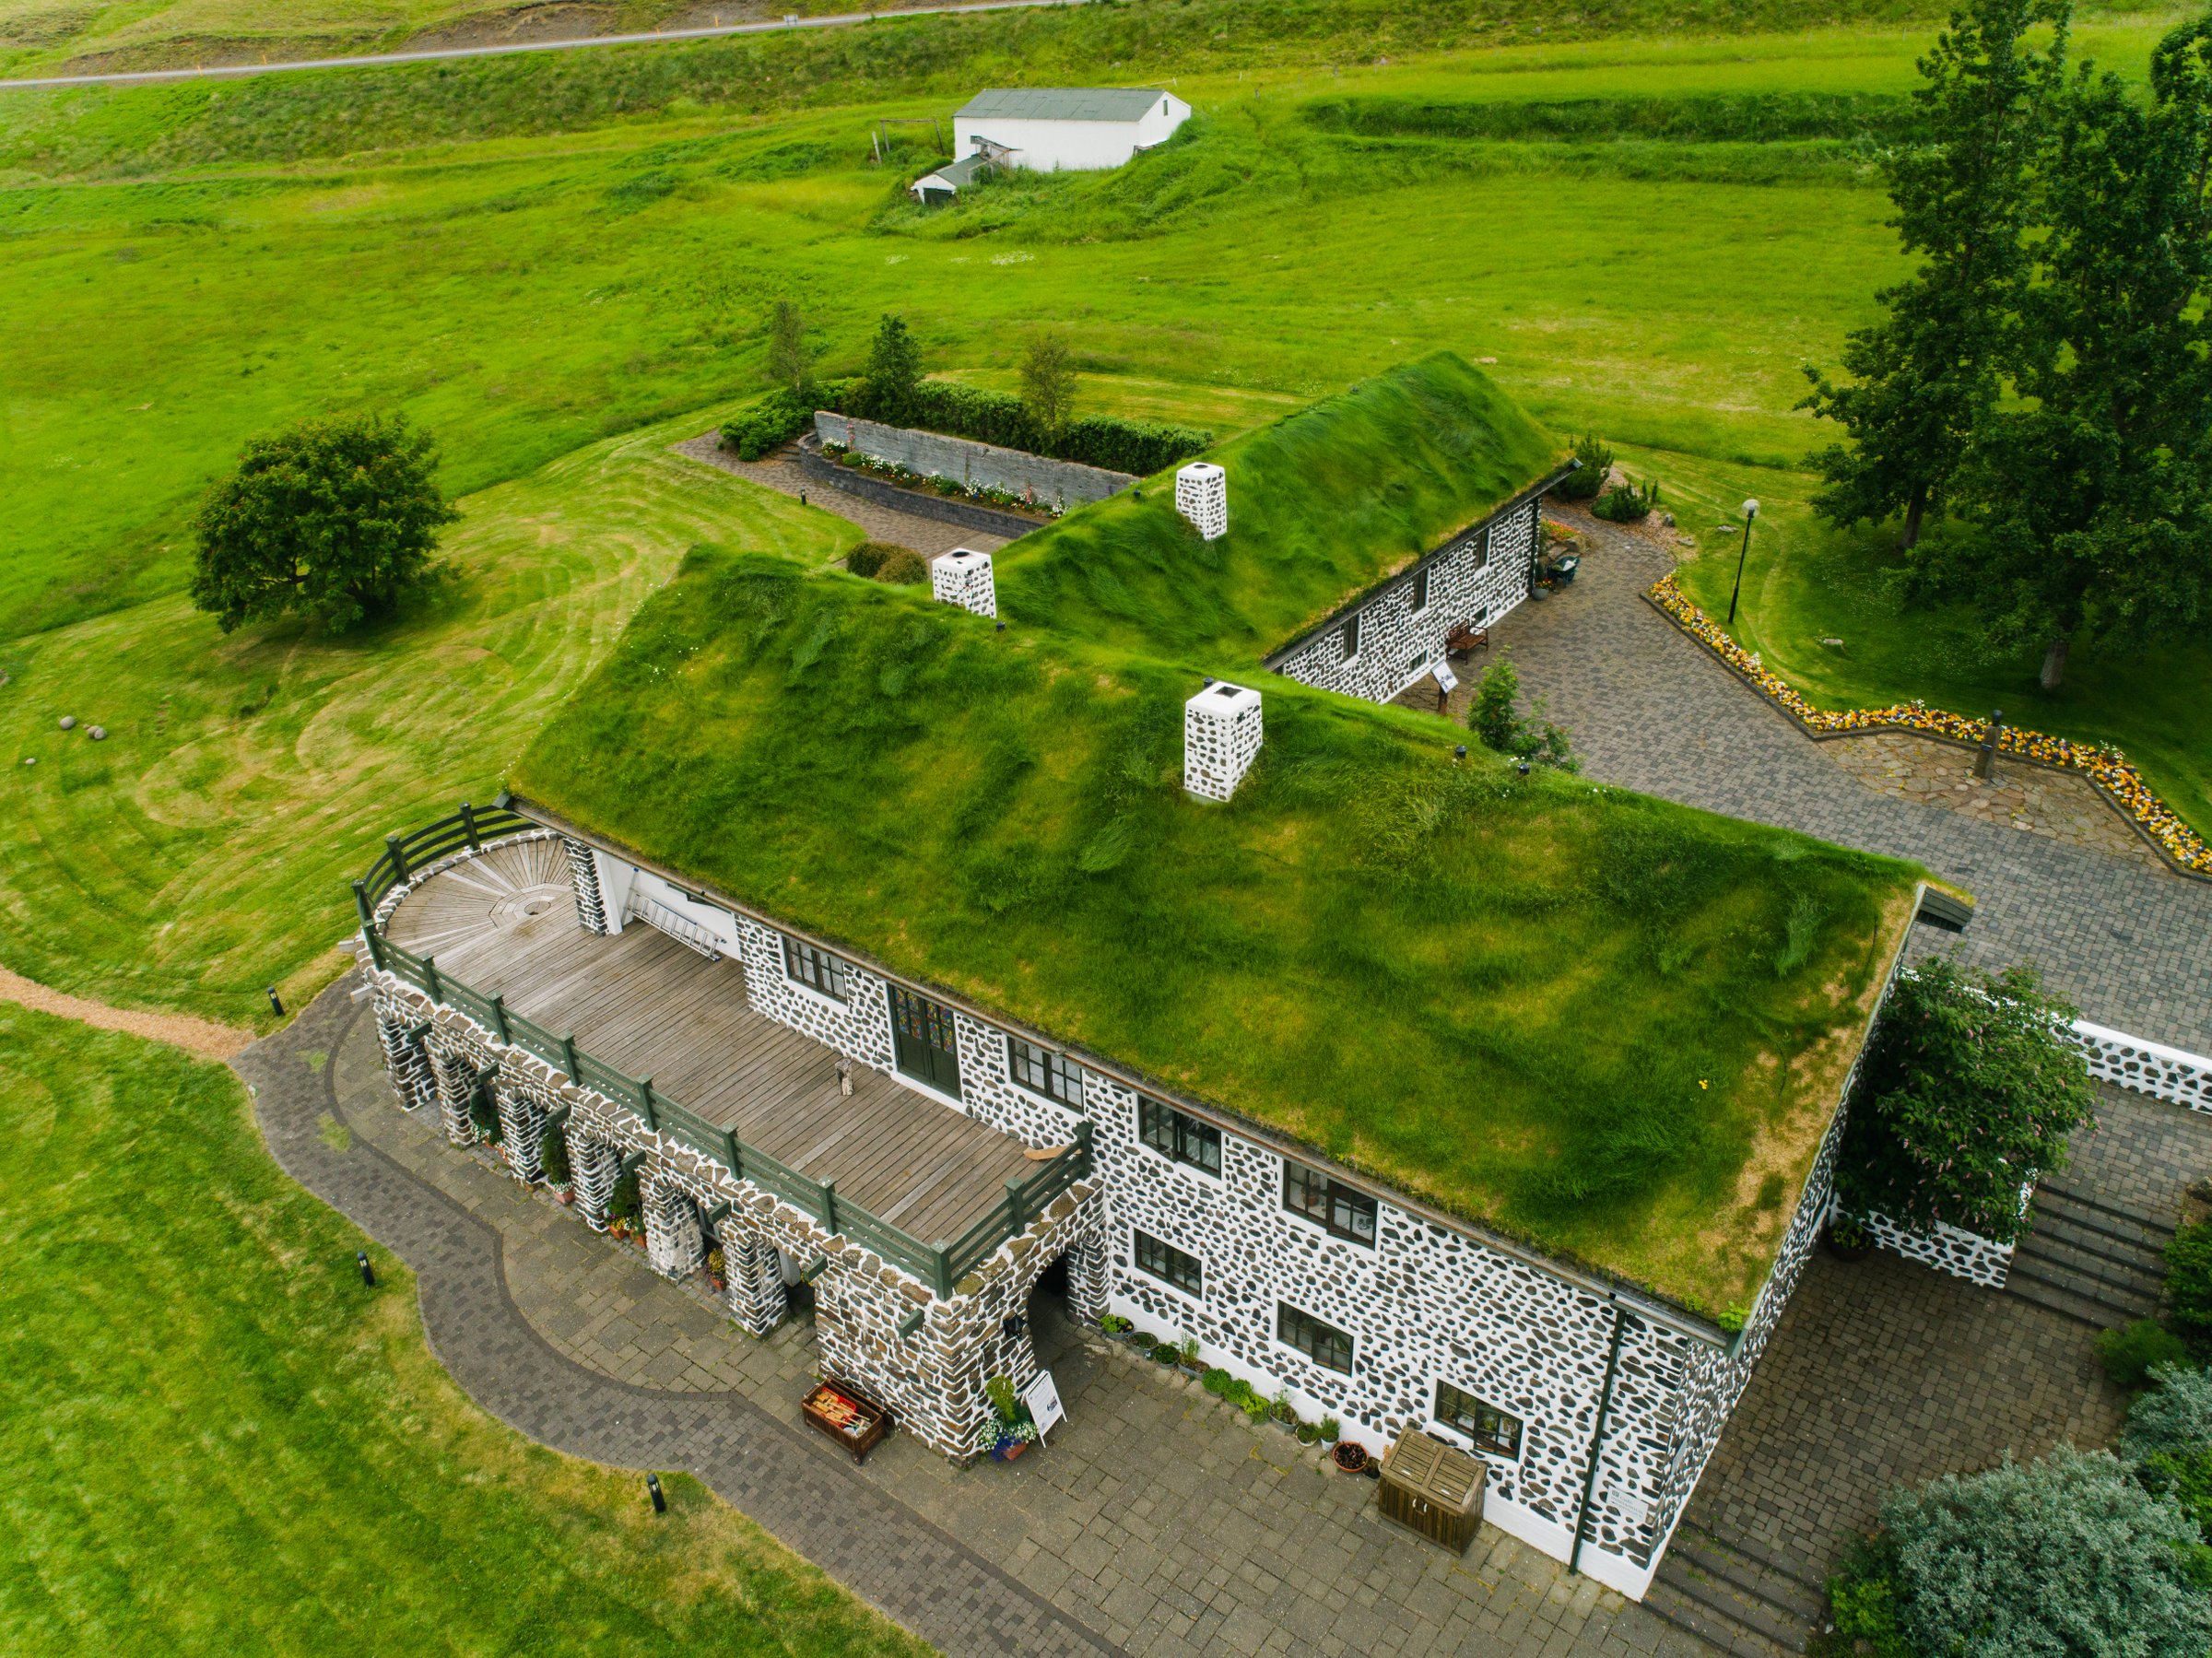 Aerial view of the Skriðuklaustur house with grass on the roof